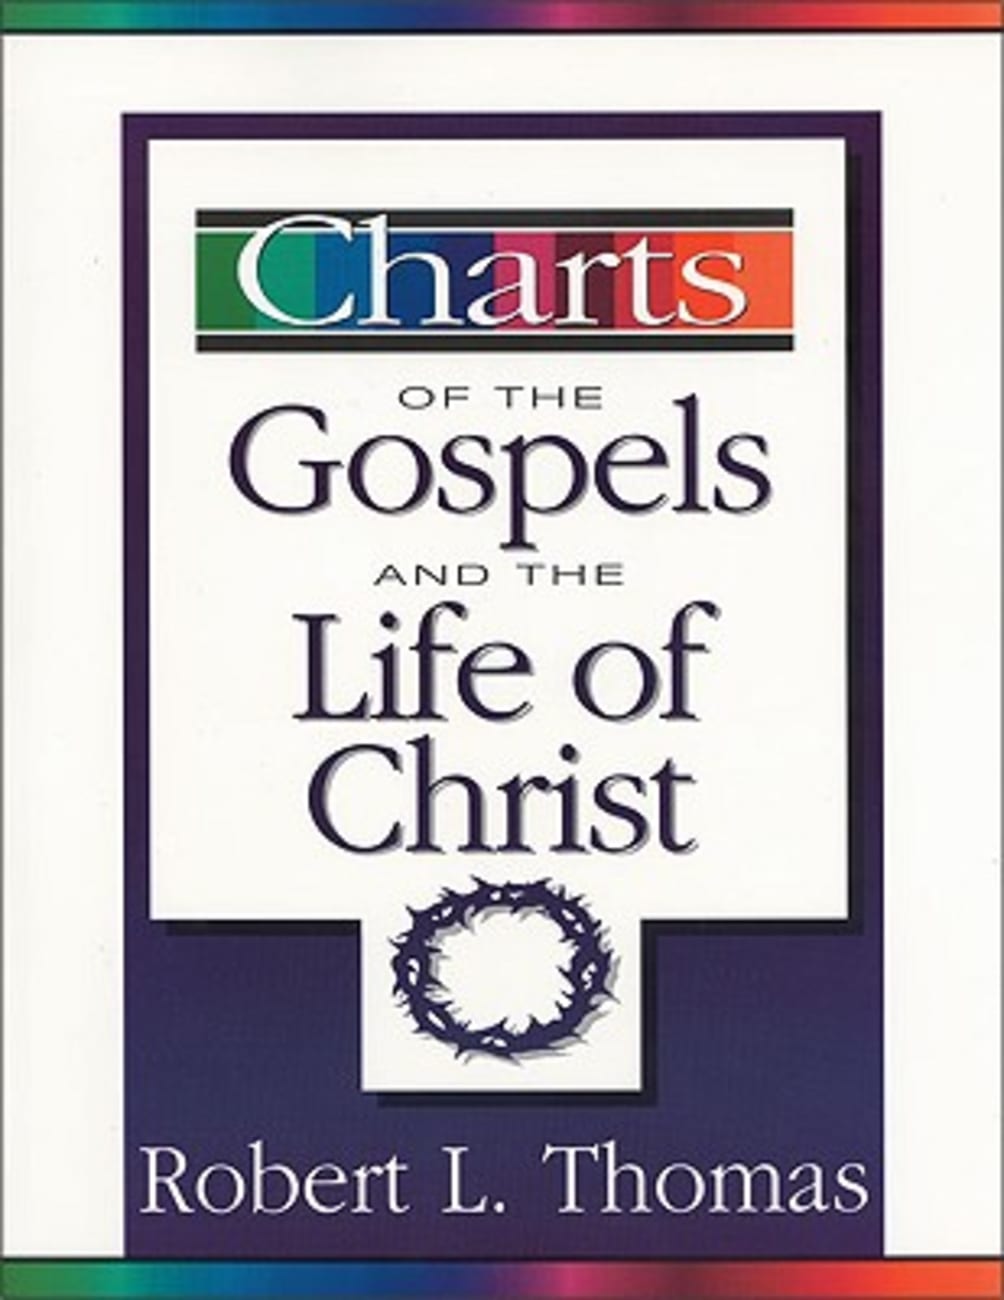 Charts of the Gospels and the Life of Christ (Zondervan Charts Series) Paperback